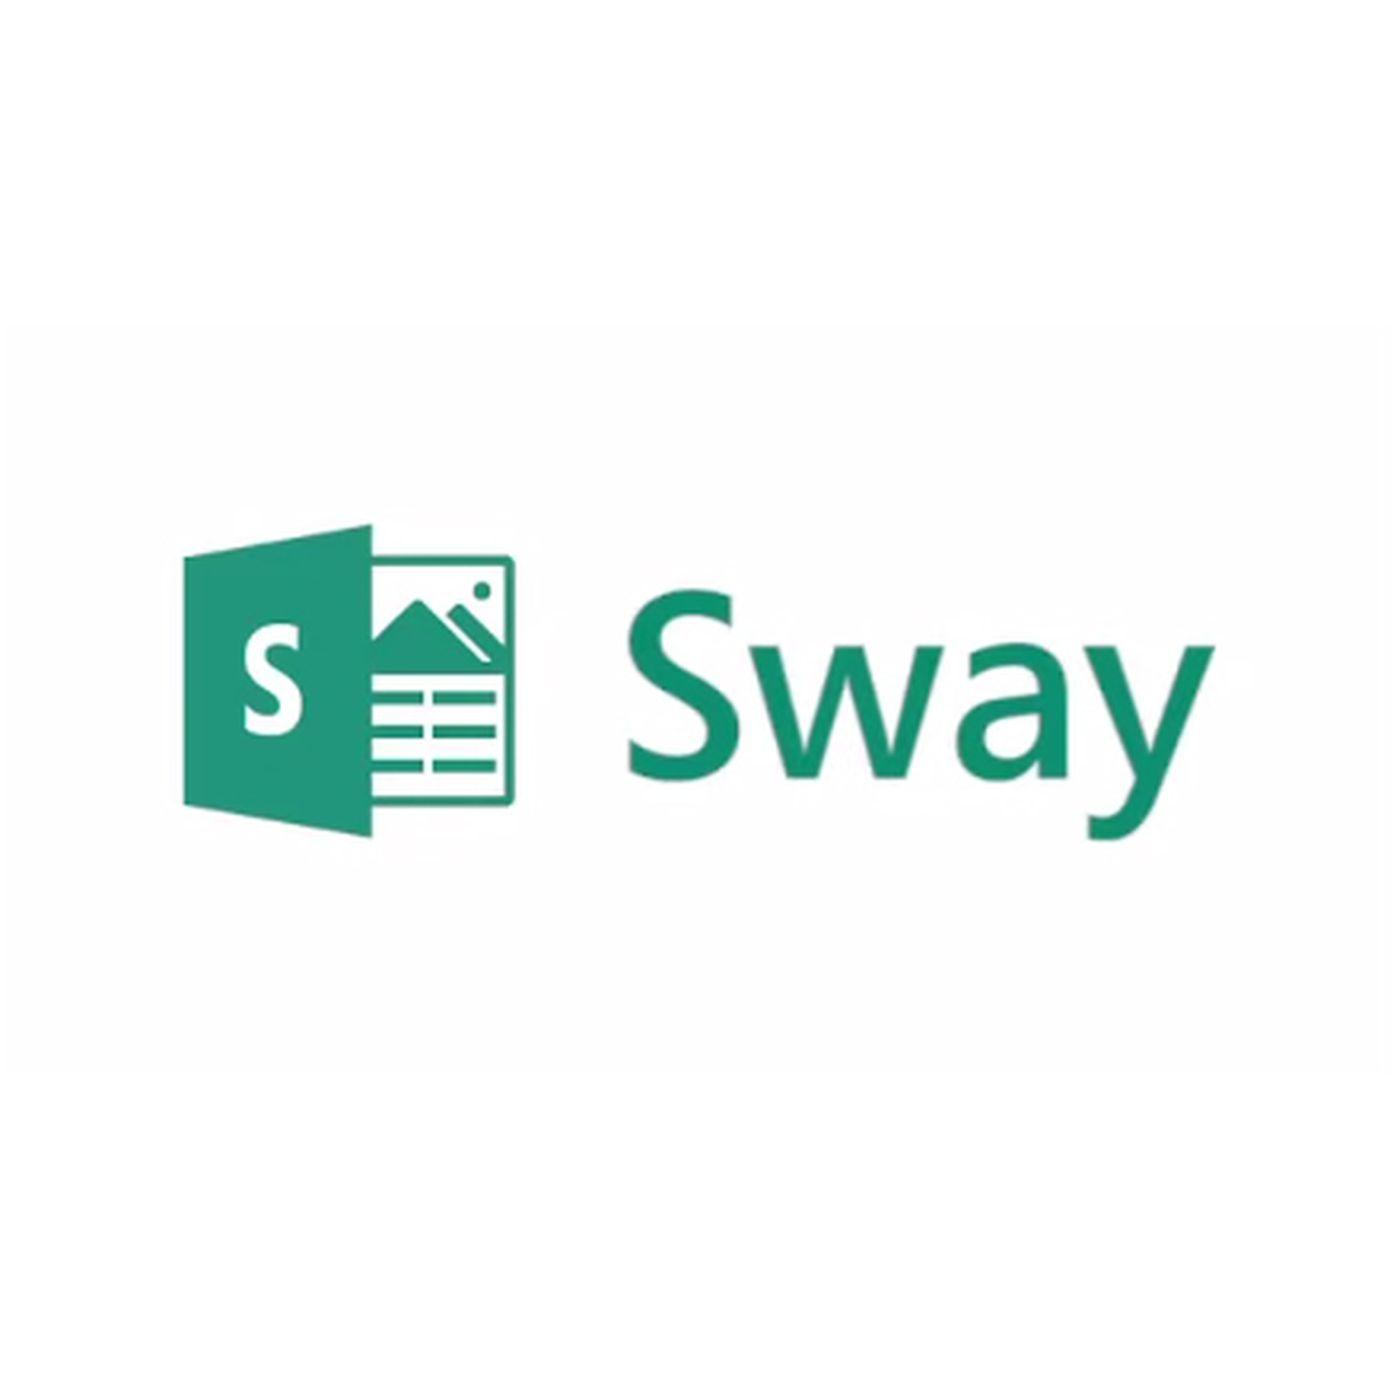 Sway Logo - Microsoft's new Sway app is a tool to build elegant websites - The Verge